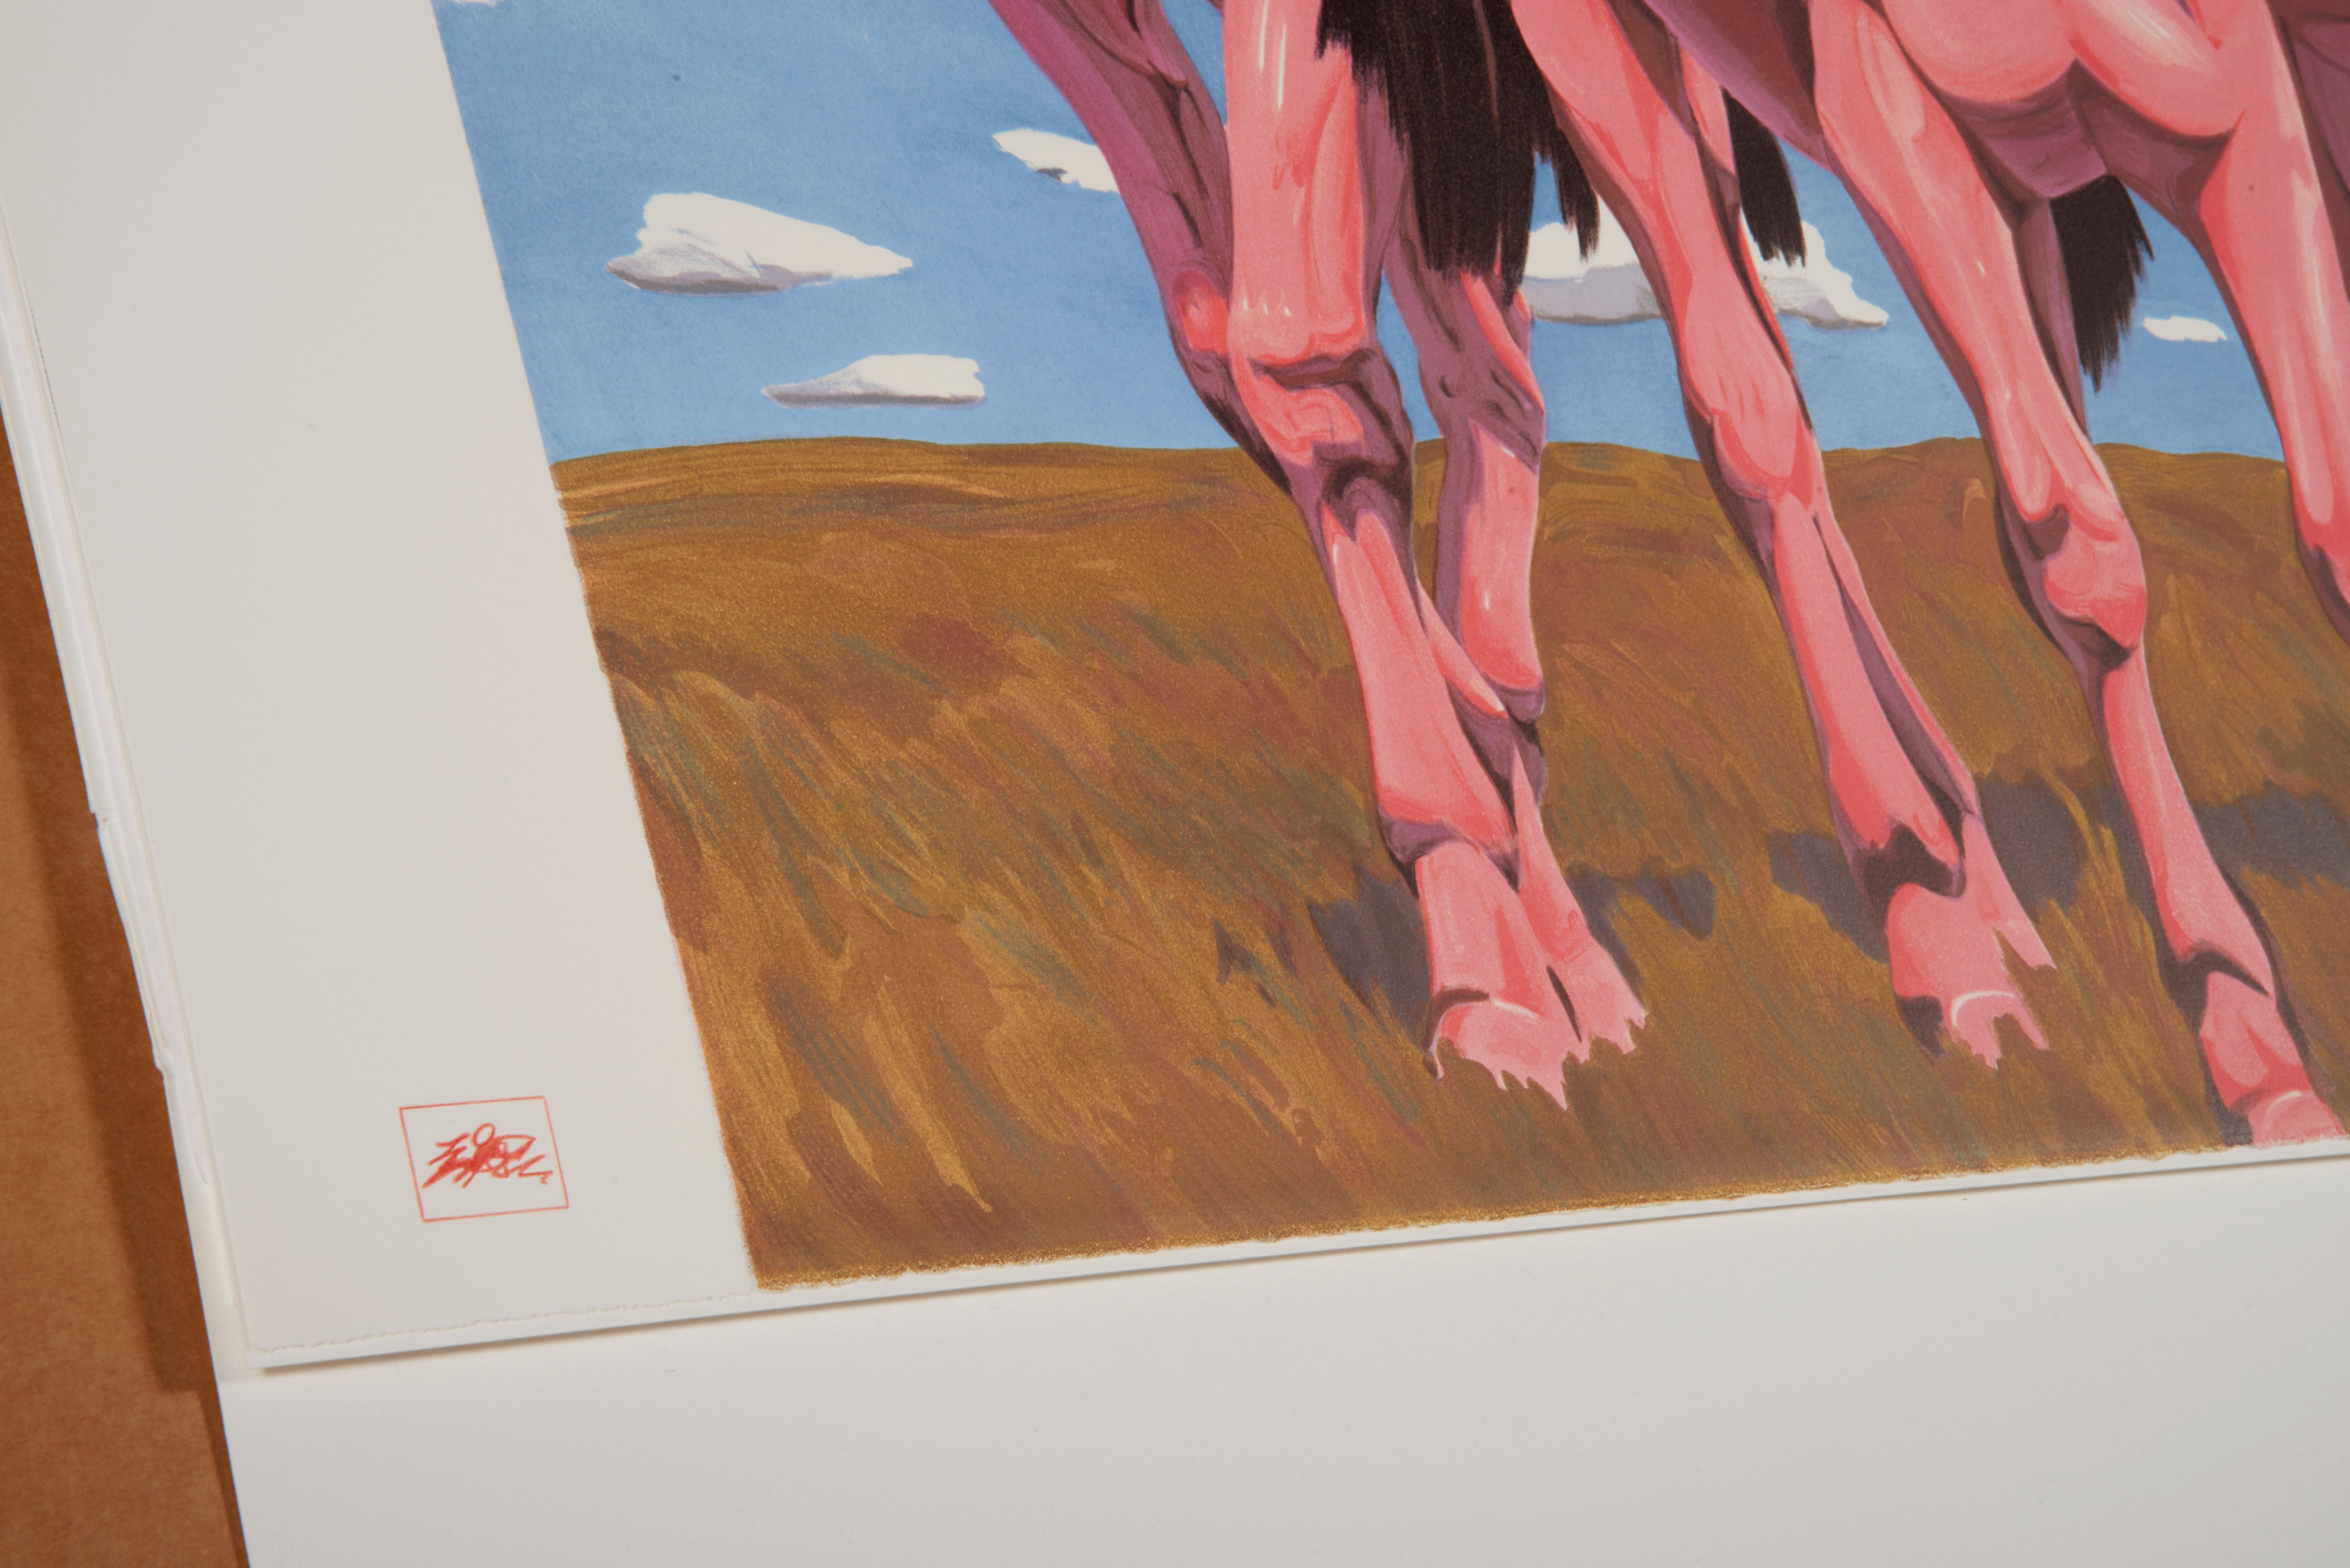 Paean on Grassland, Yue Minjun - Art, Lithograph, Limited Edition, China, Print For Sale 4